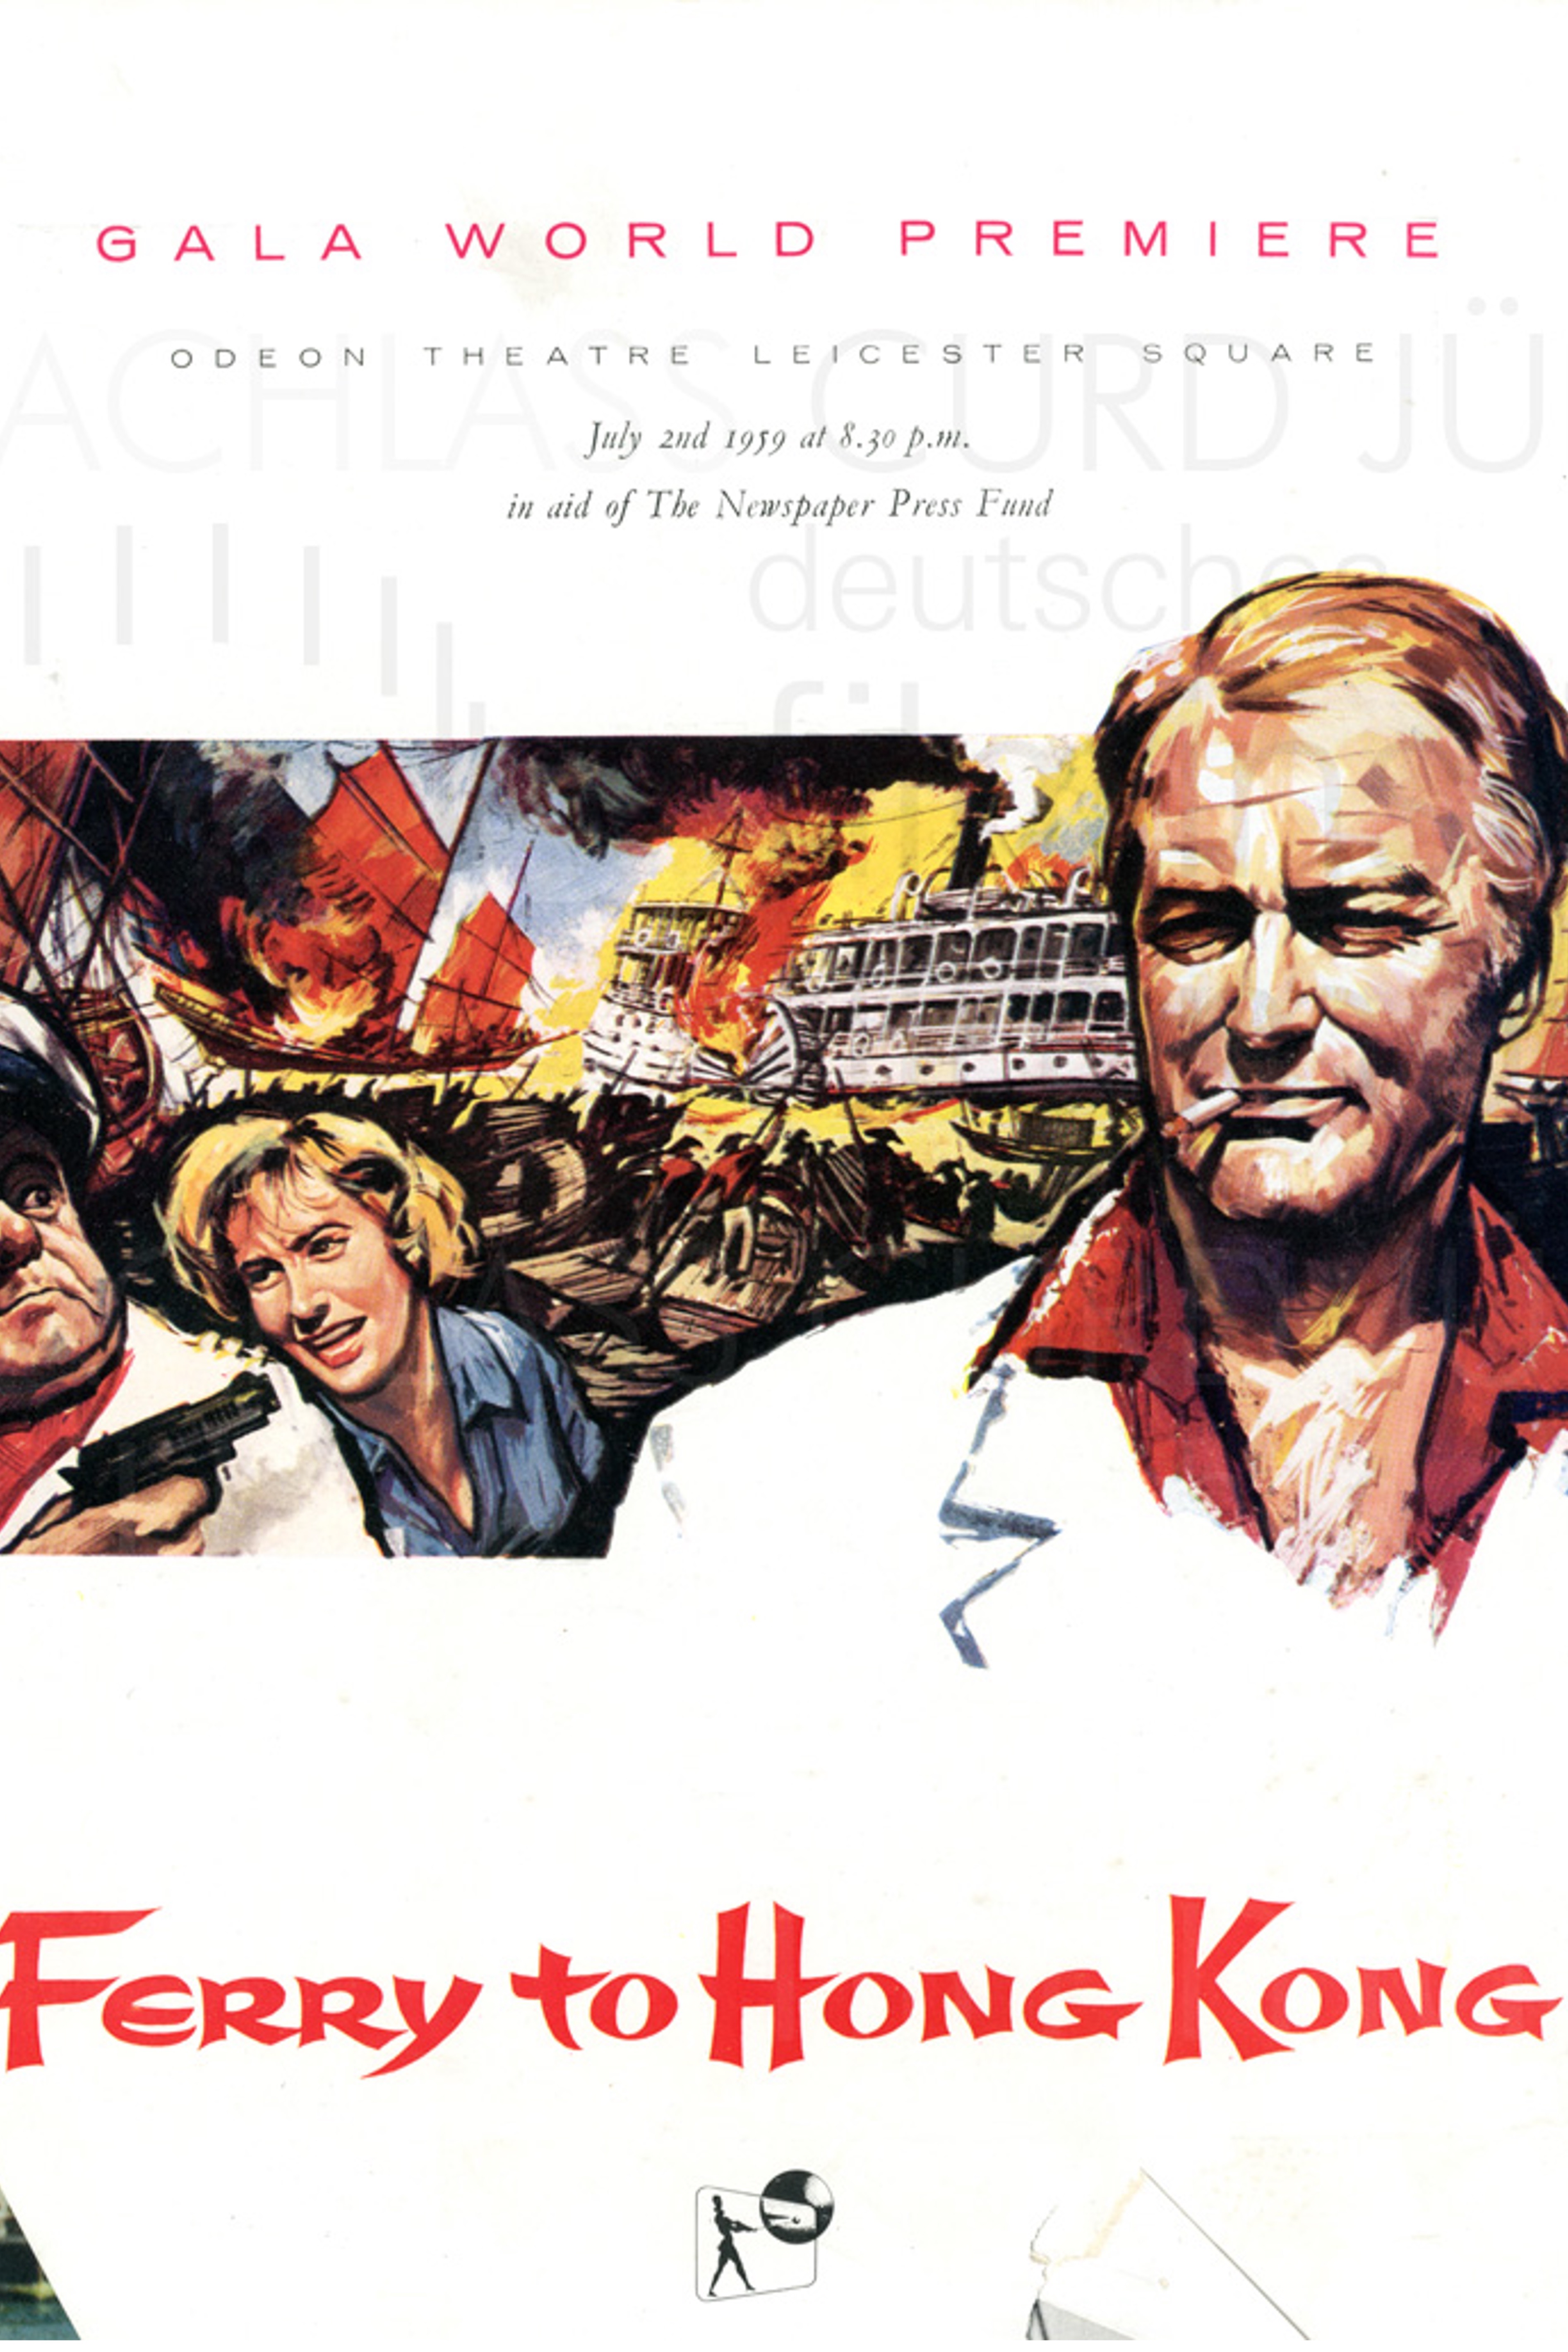 The Man without a Country: British Imperial Nostalgia in Ferry to Hong Kong (1959)